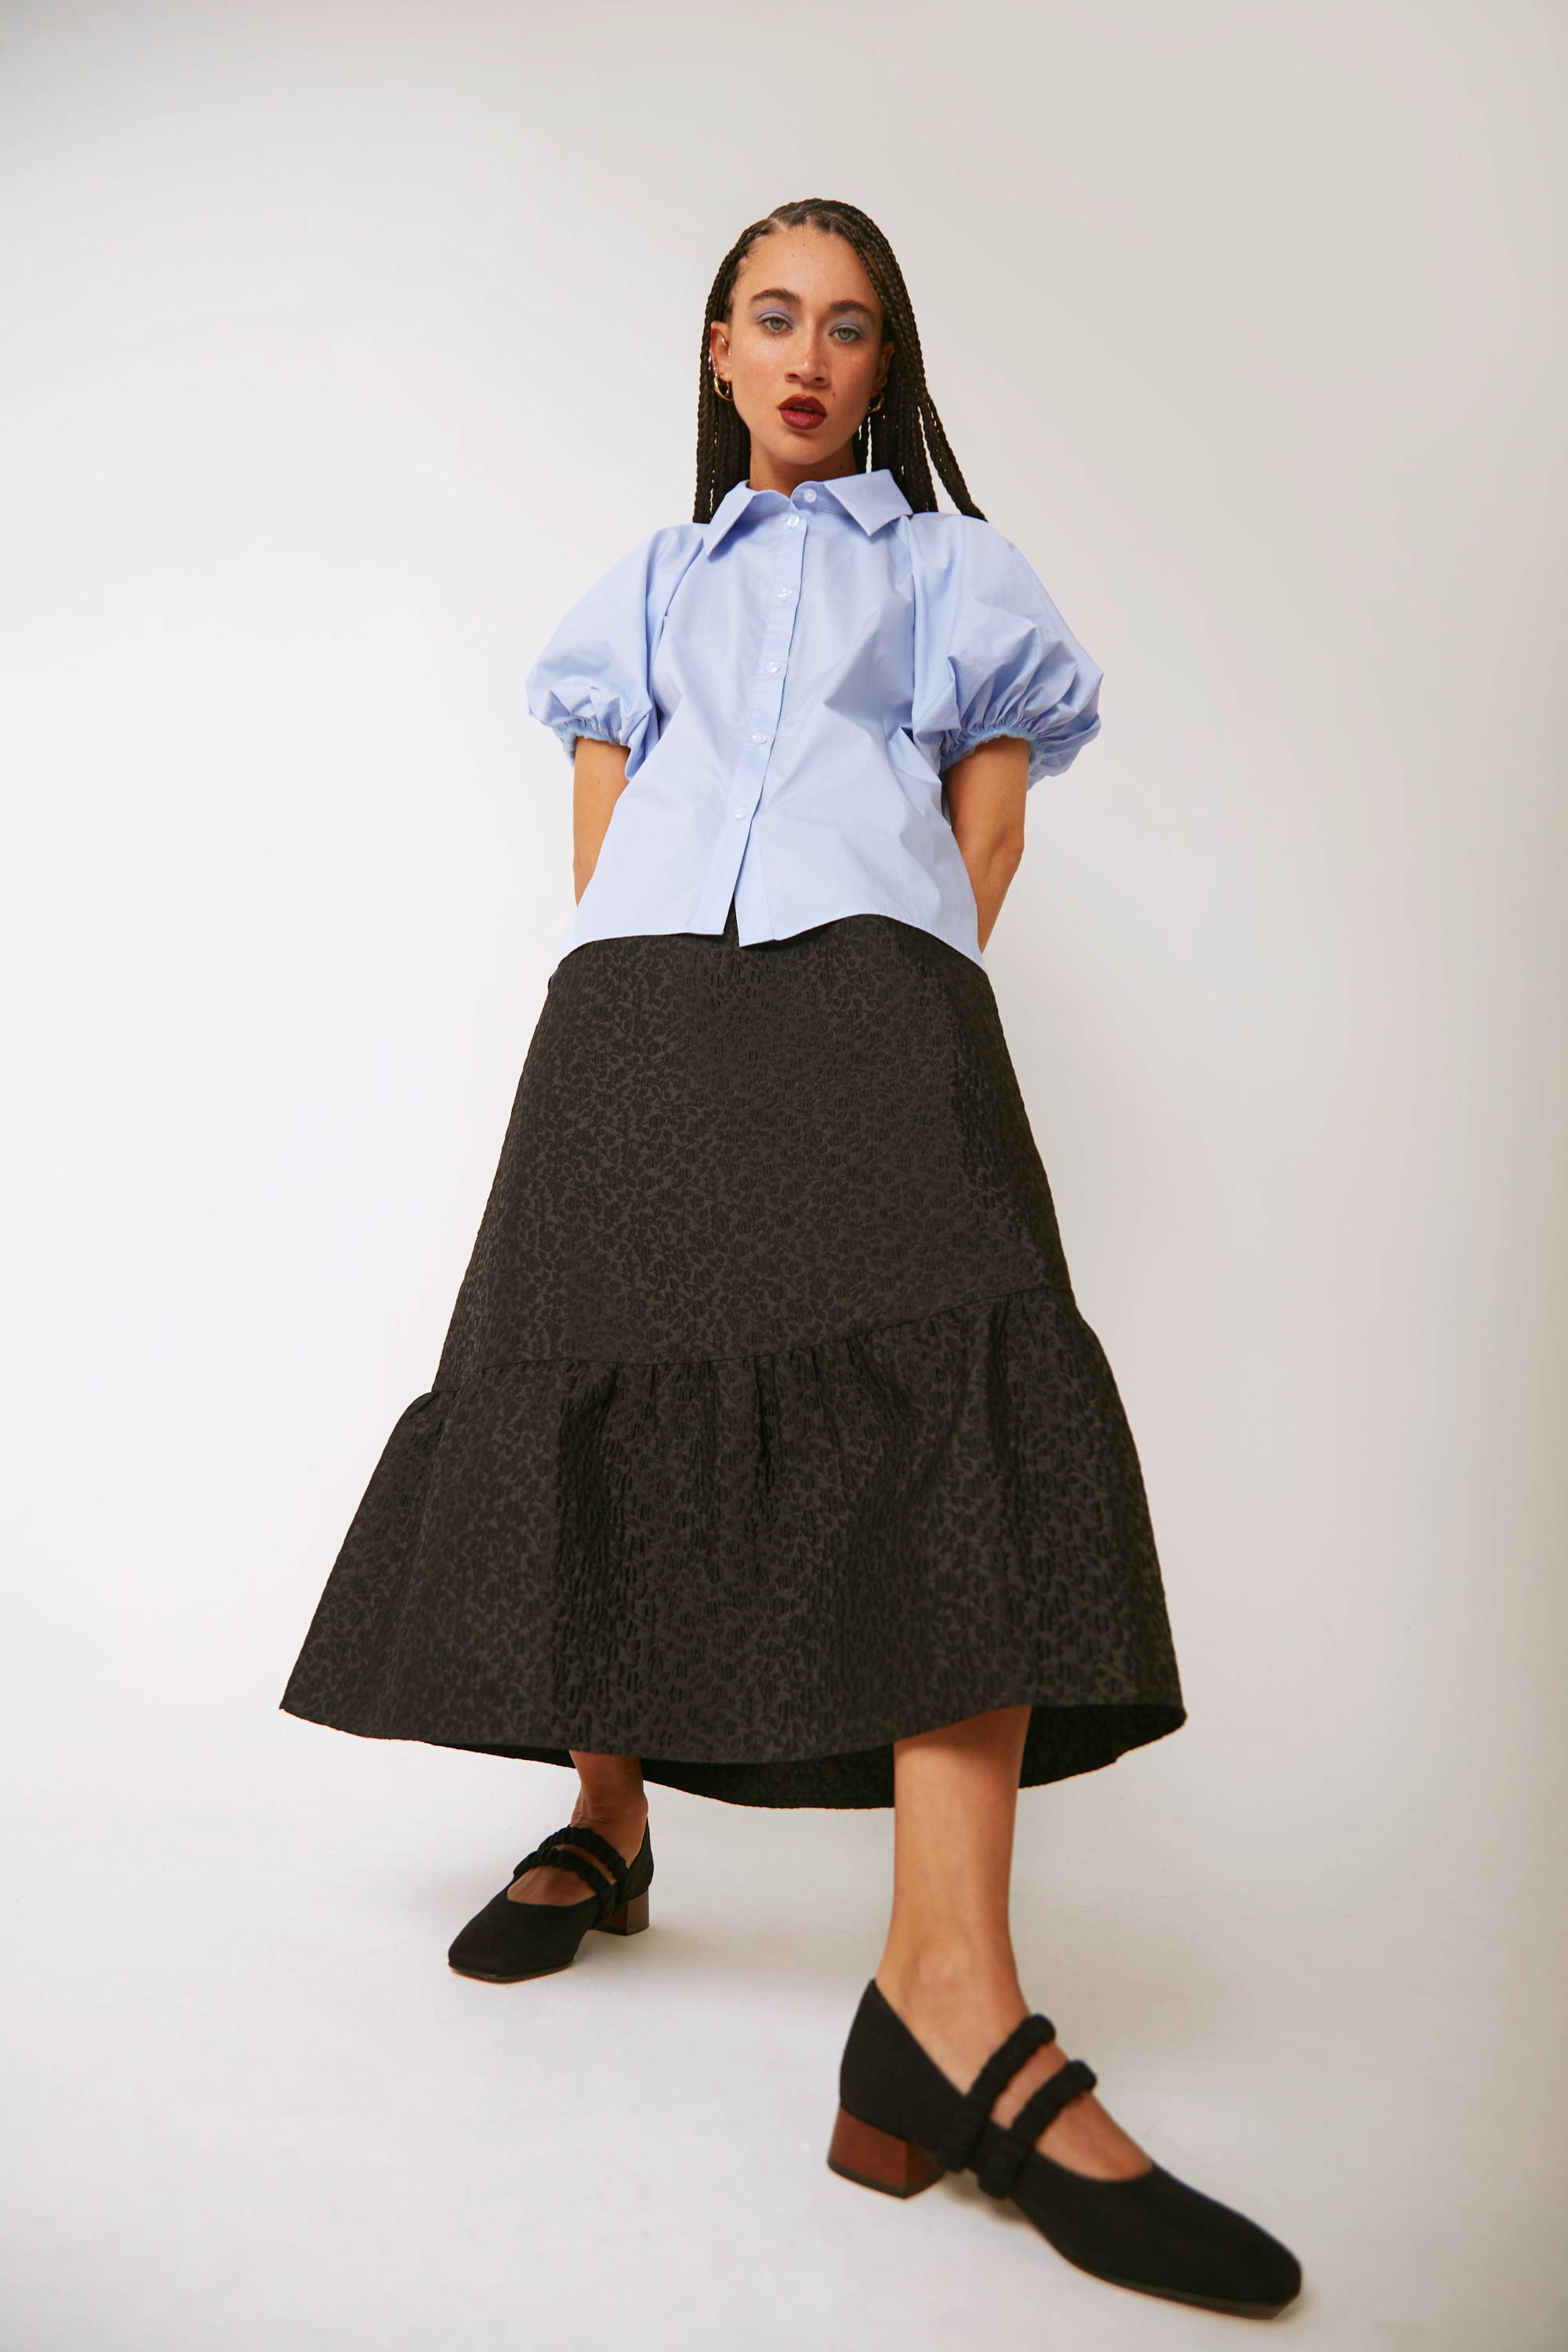 Vandrelaar Ruth mary-jane pump in black linen worn by model and styled with a jacquard black midi skirt and a light blue blouse with puff sleeves